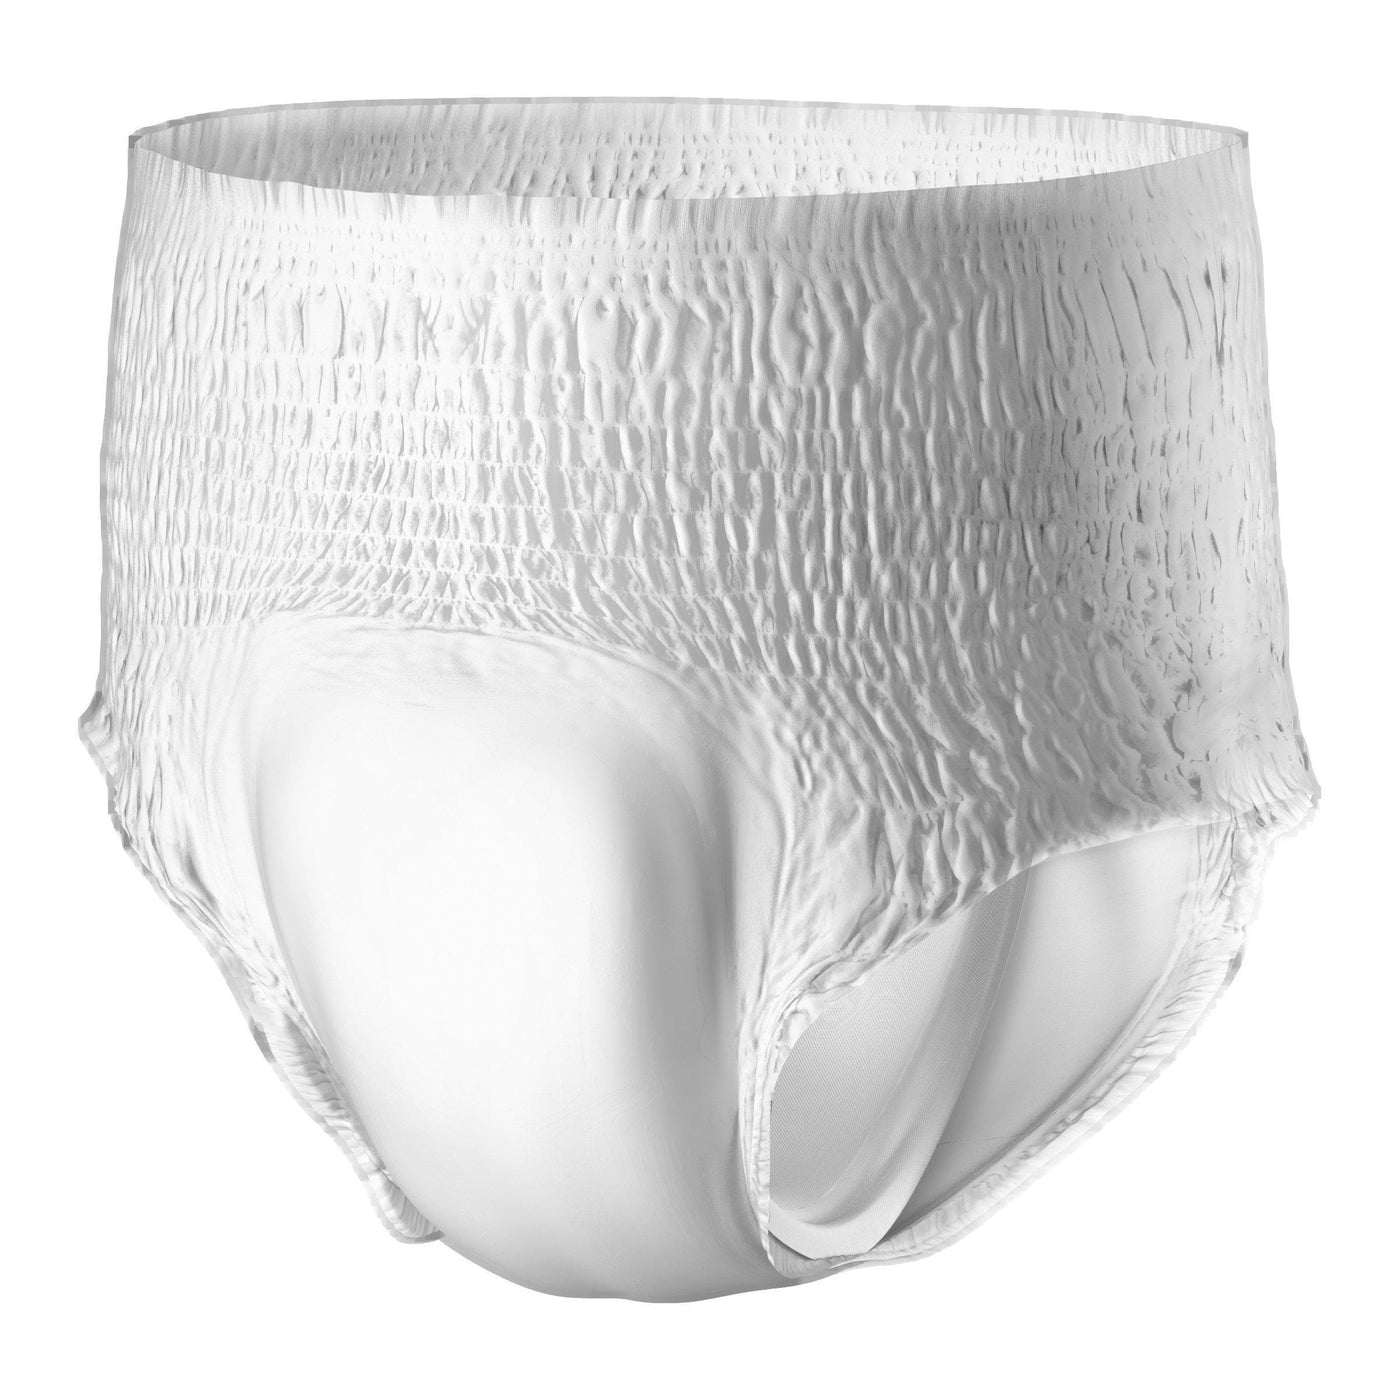  Prevail Daily Protective Underwear - Unisex Adult